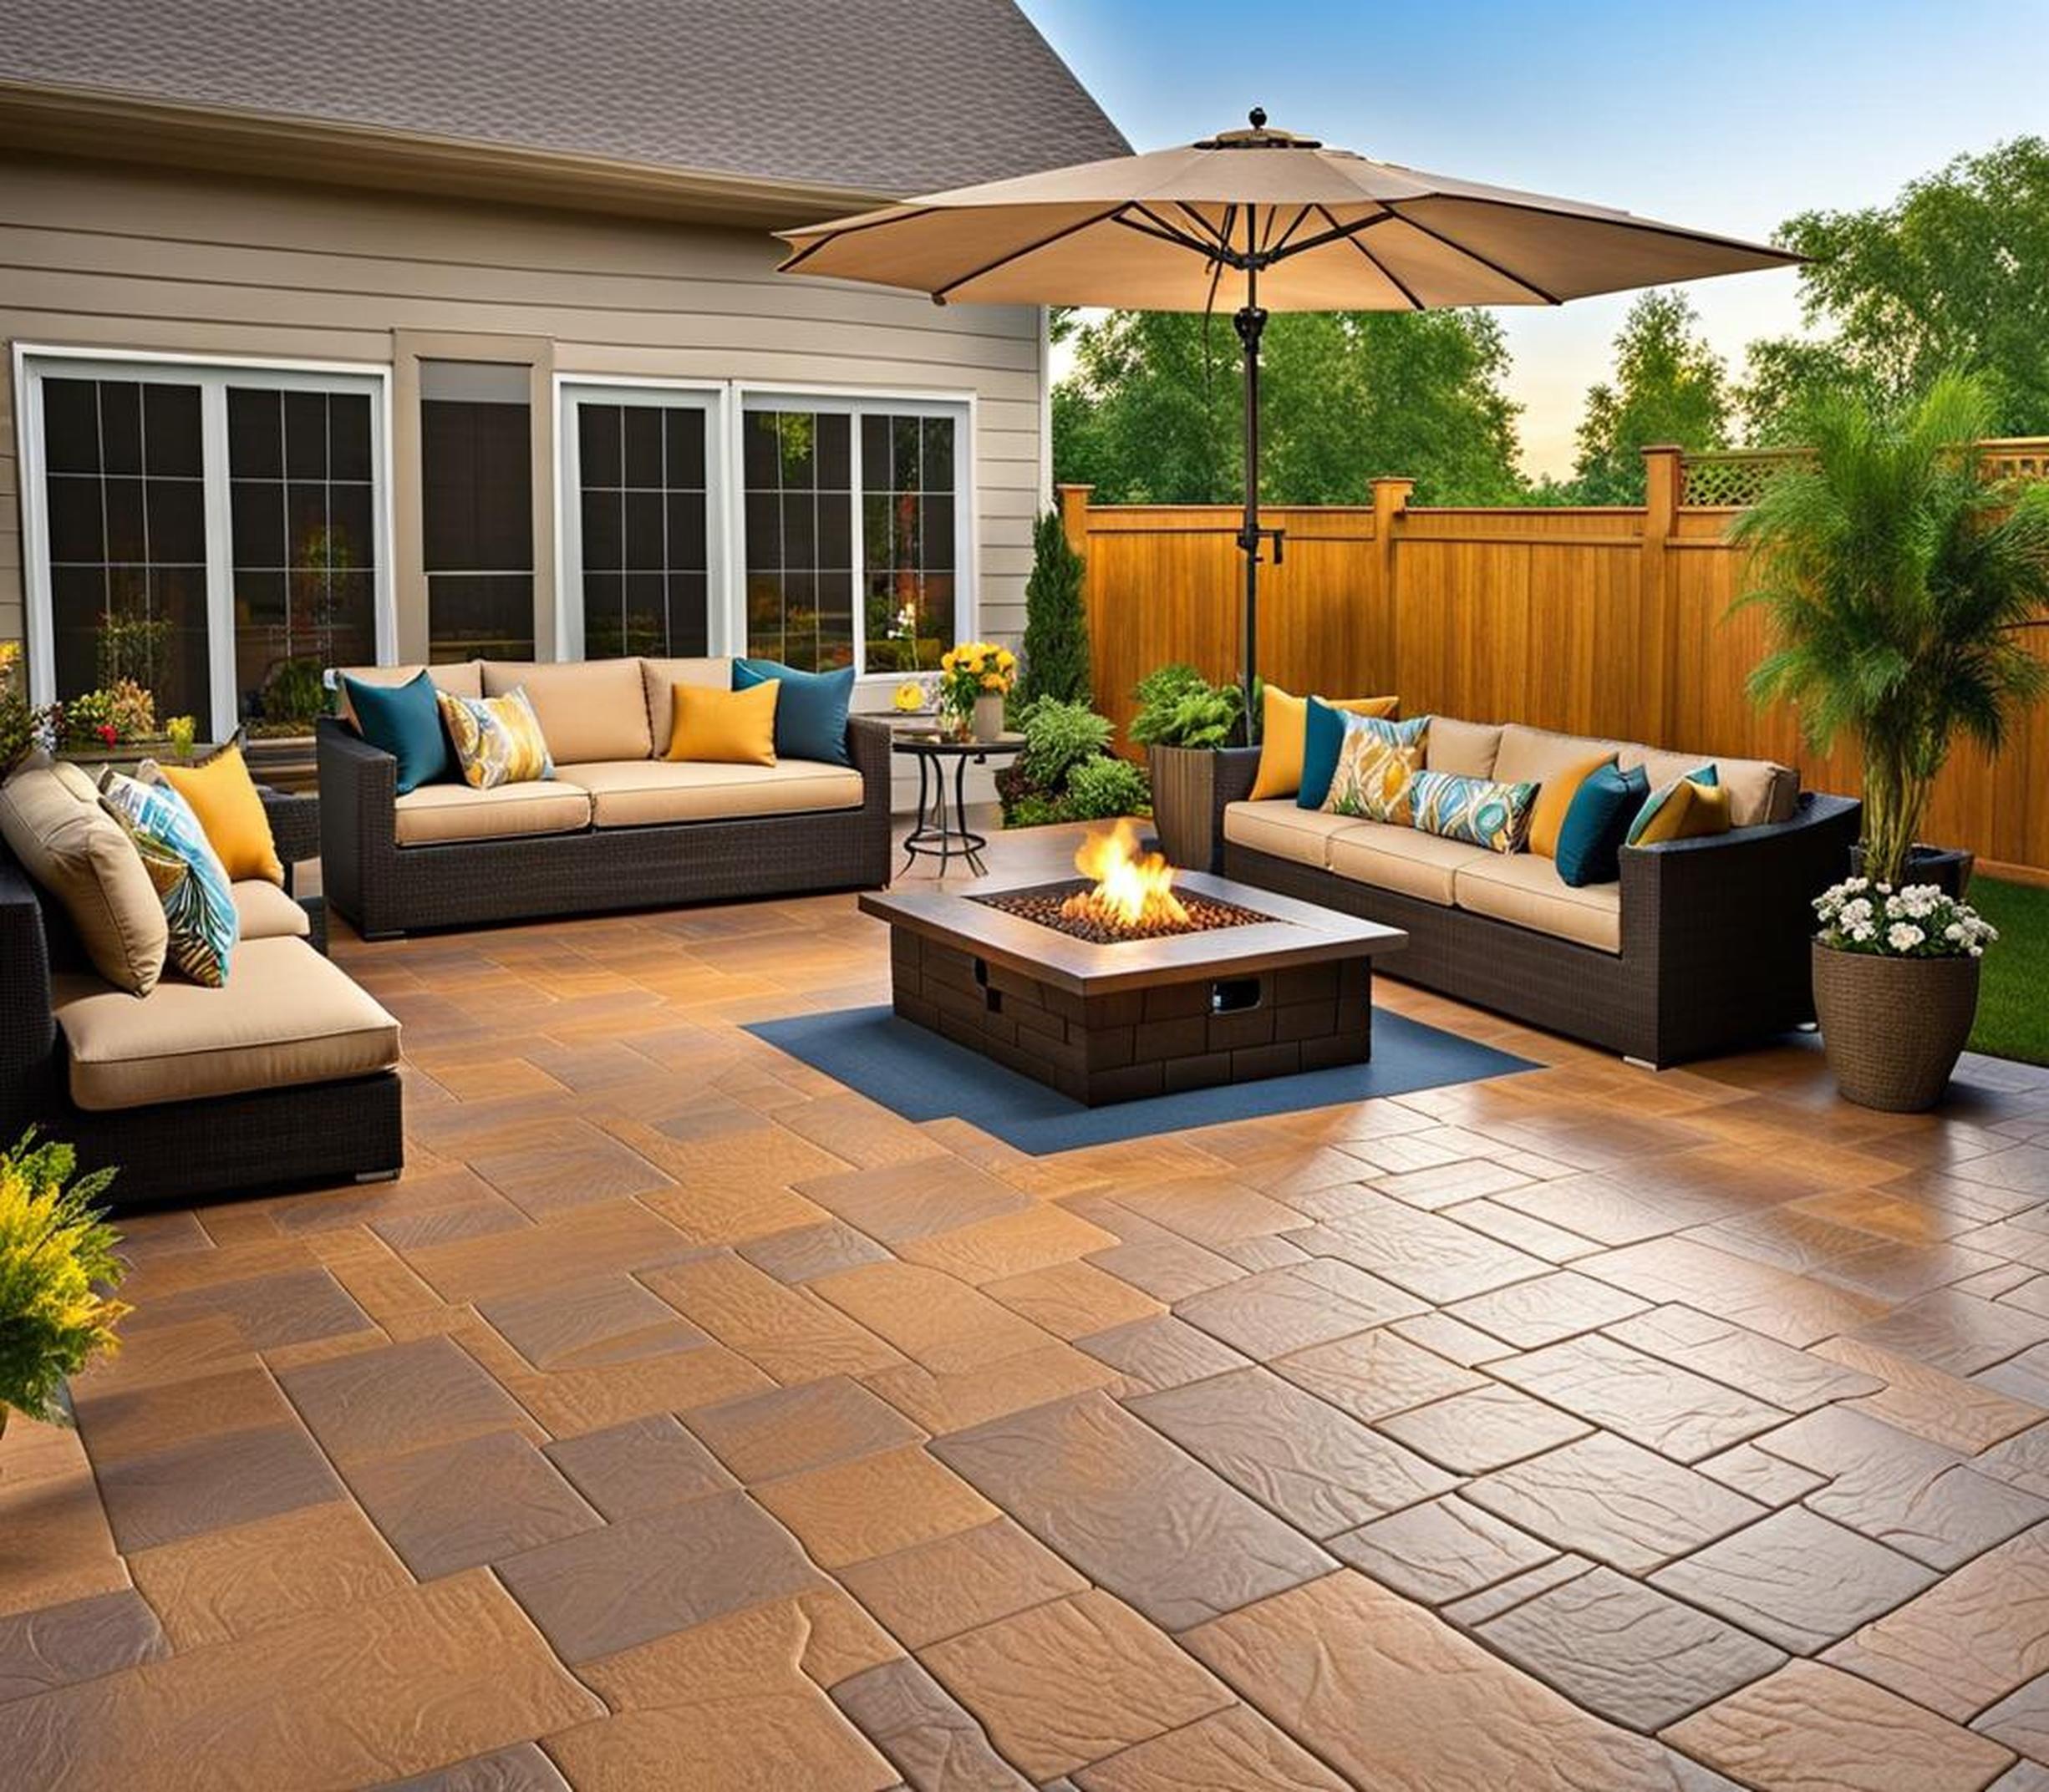 stamped concrete patio ideas on a budget